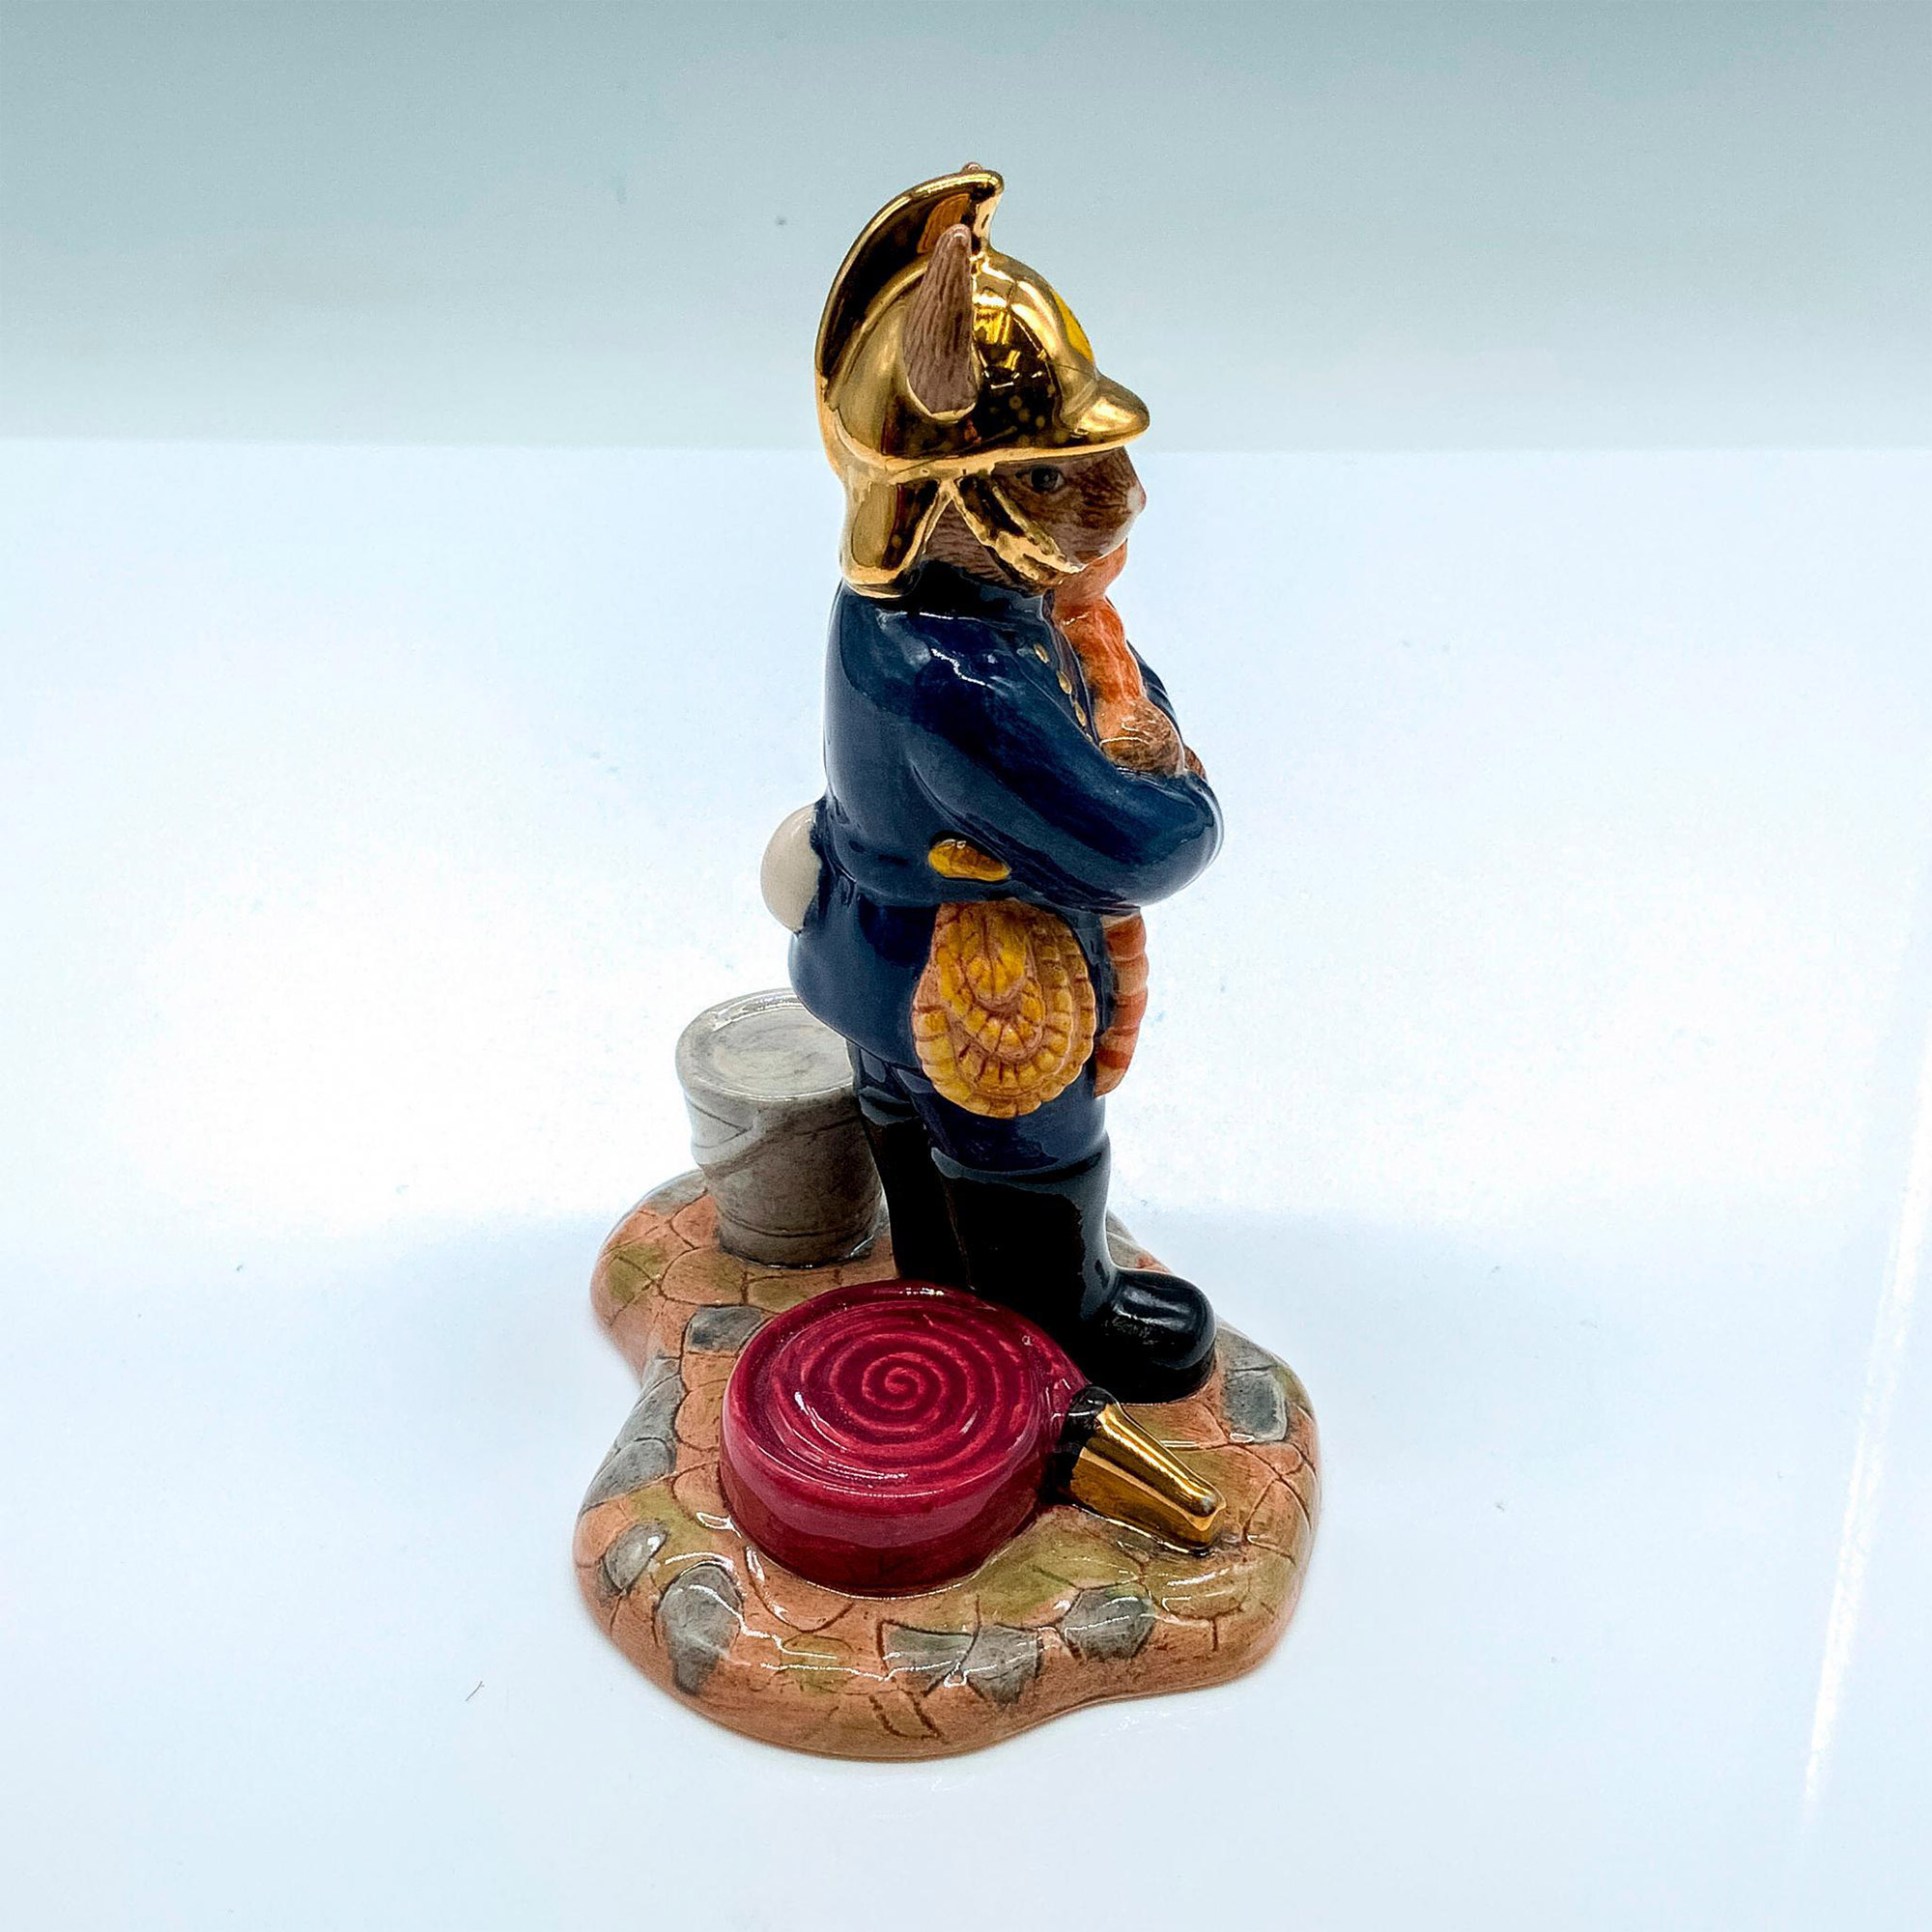 Royal Doulton Bunnykins Figurine, LE Gold Issue Fireman DB376 - Image 2 of 5